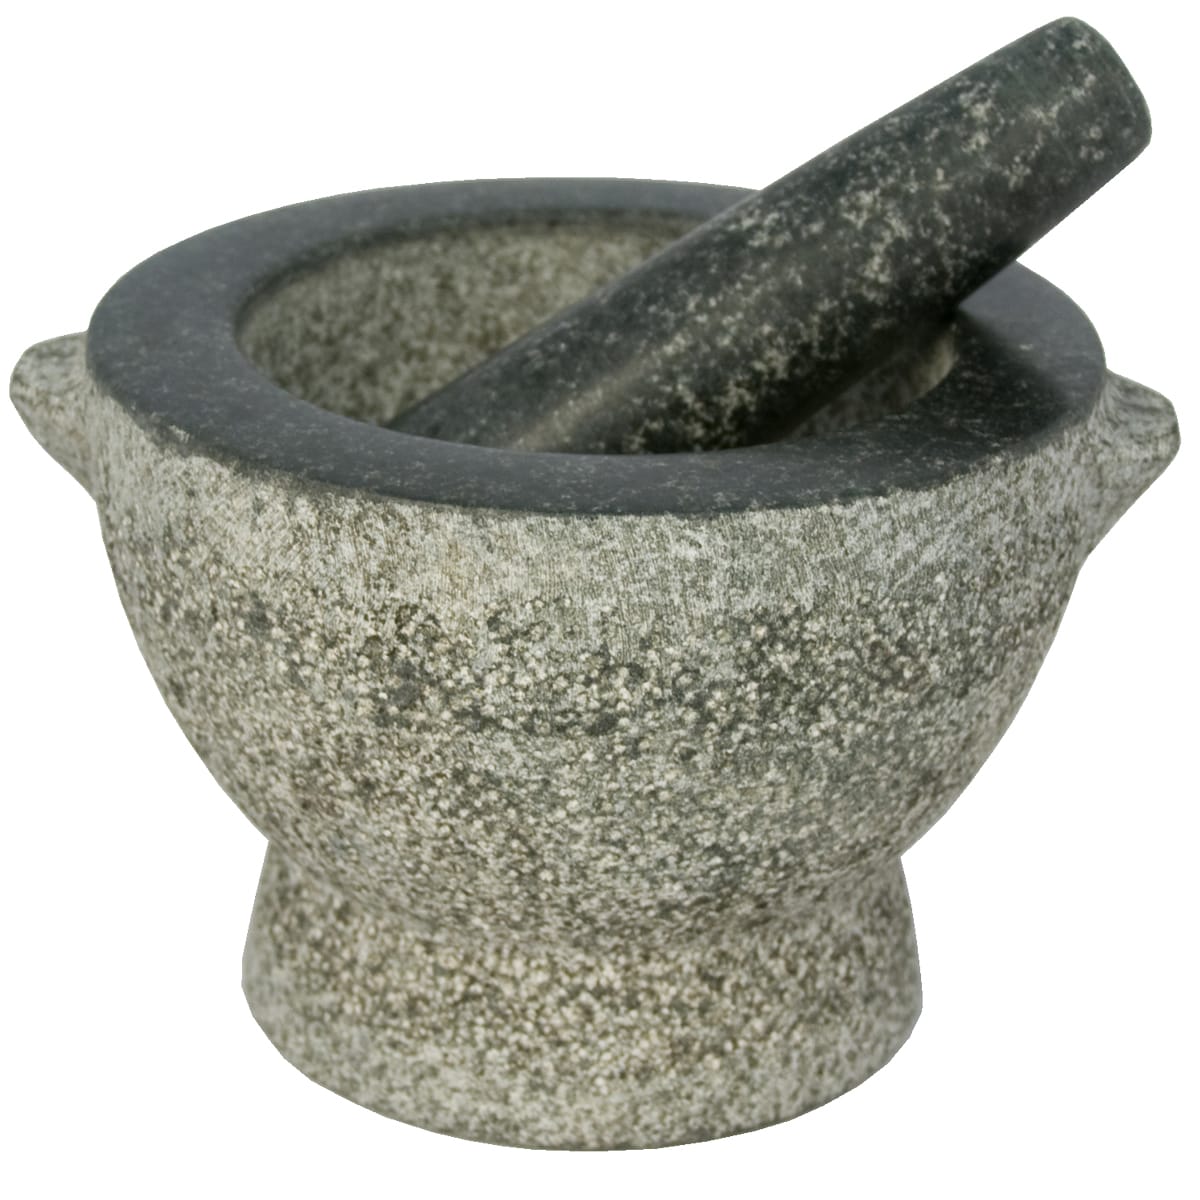 Large Mortar and Pestle Set, Granite Stone, Heavy Duty Herb Spice